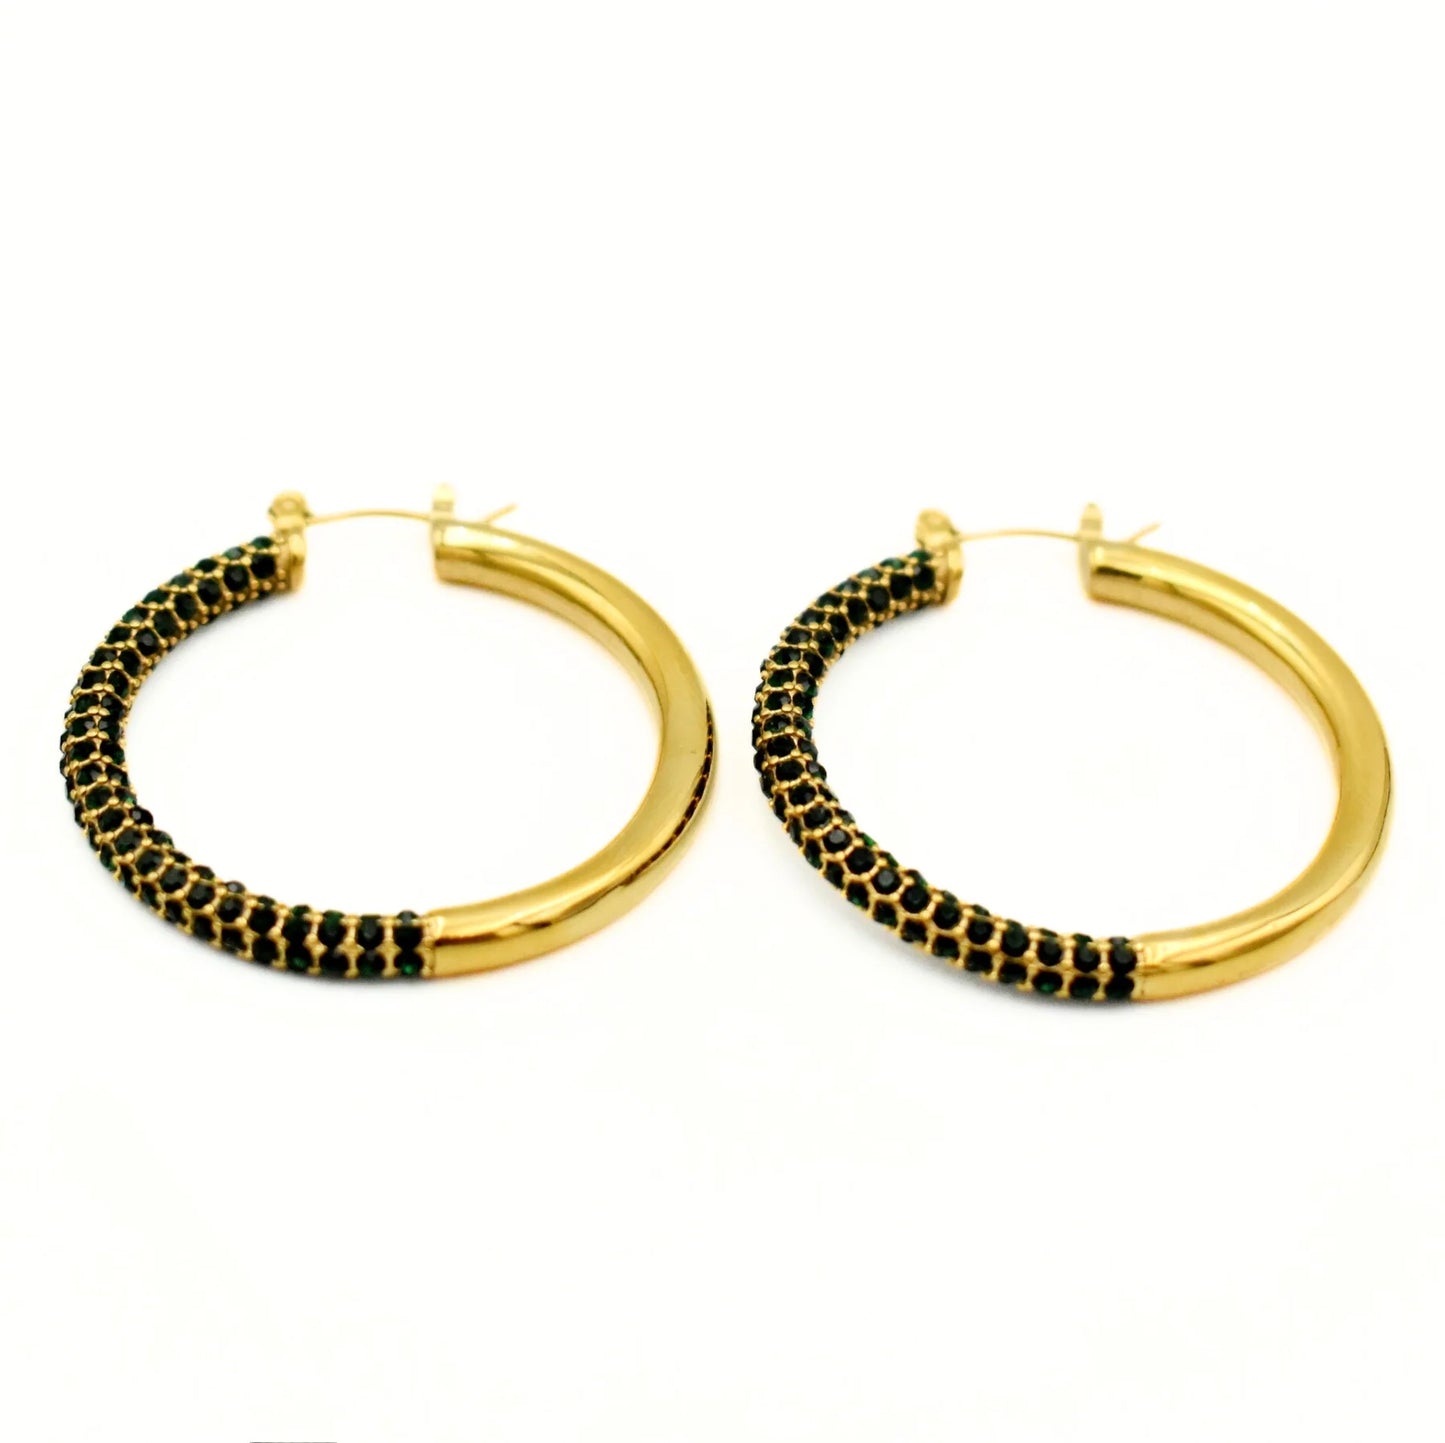 Gold and Black hoops